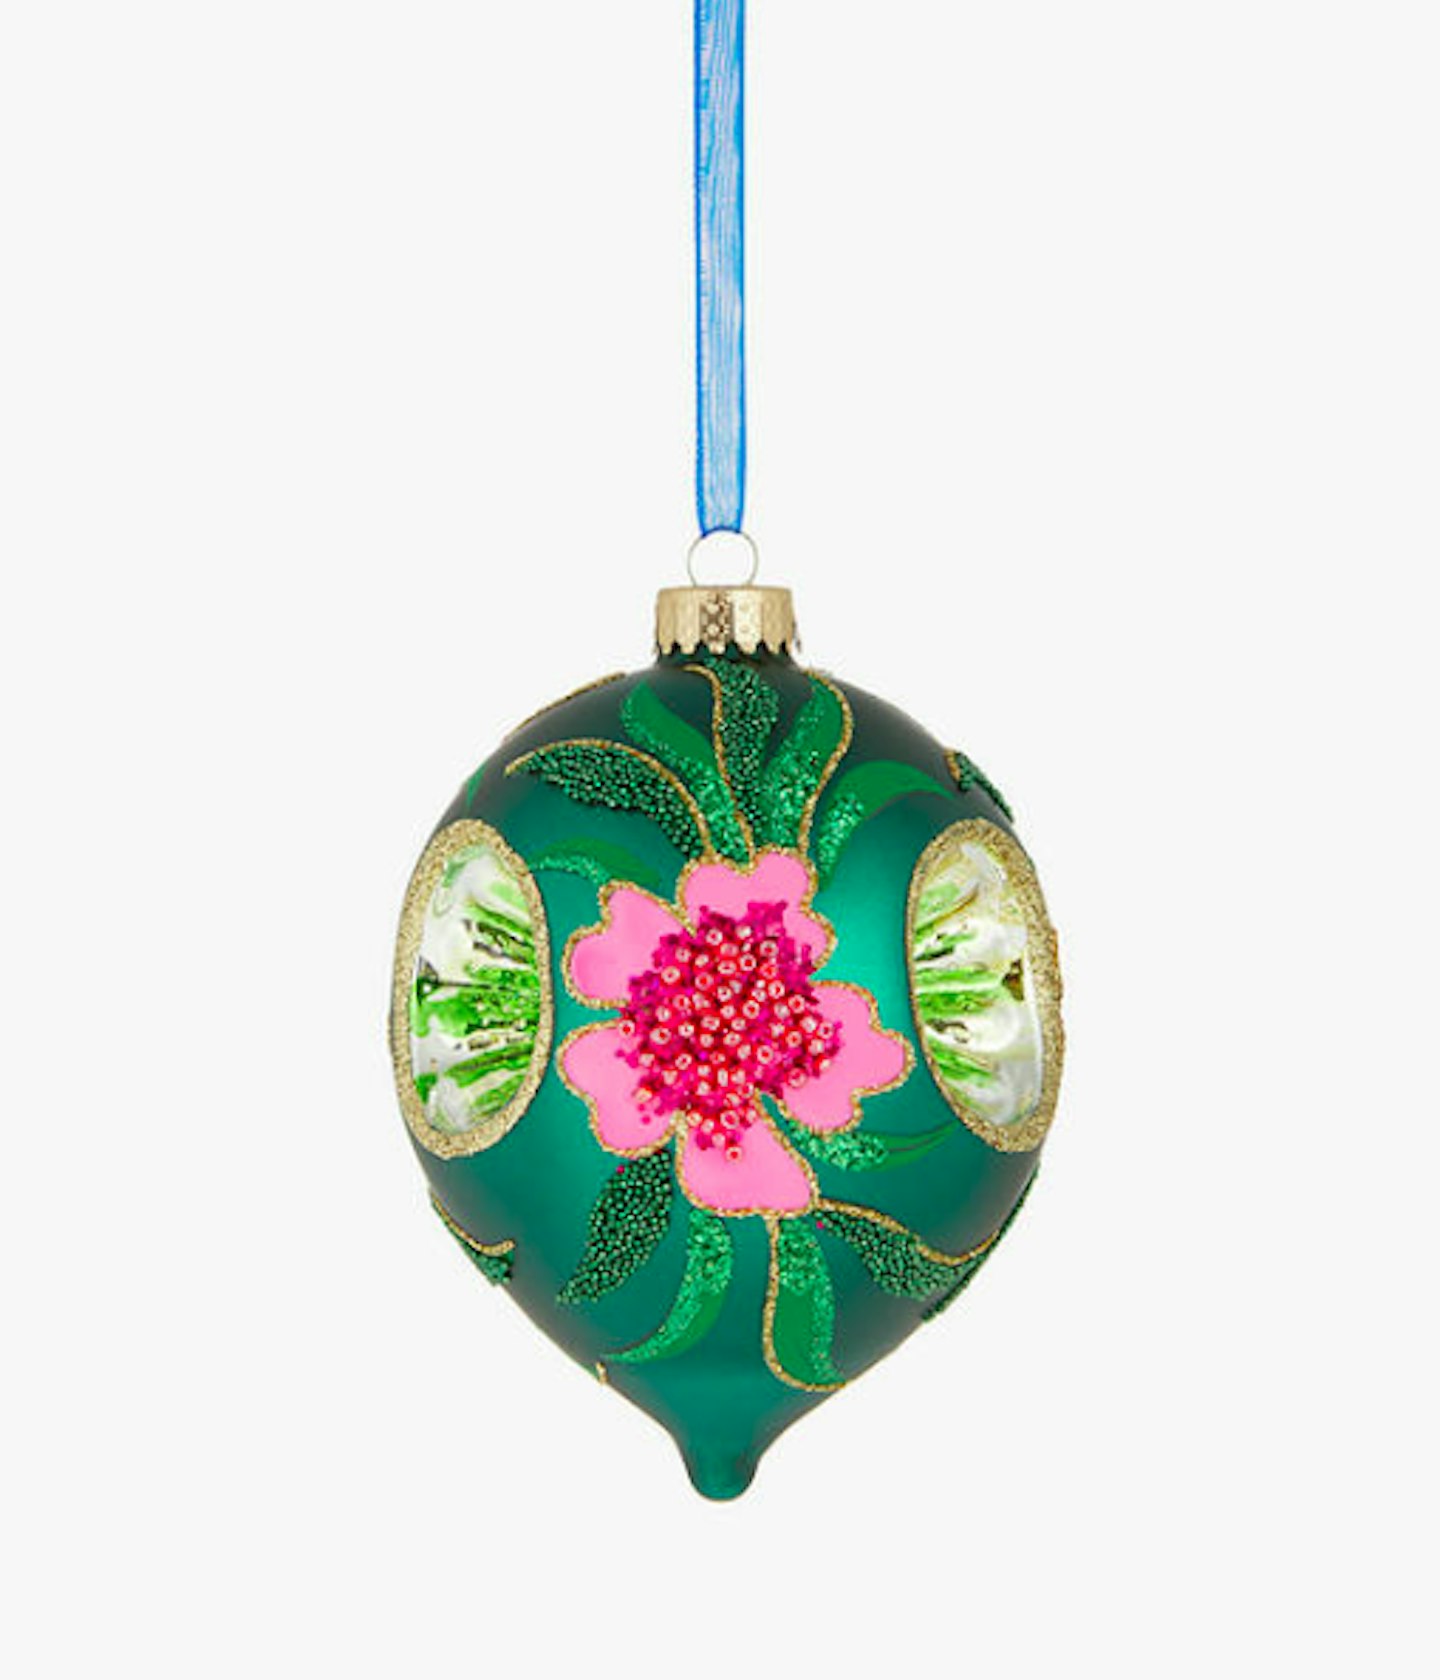 Christmas 2020: Christmas Tree Decorations Trends - Opulent